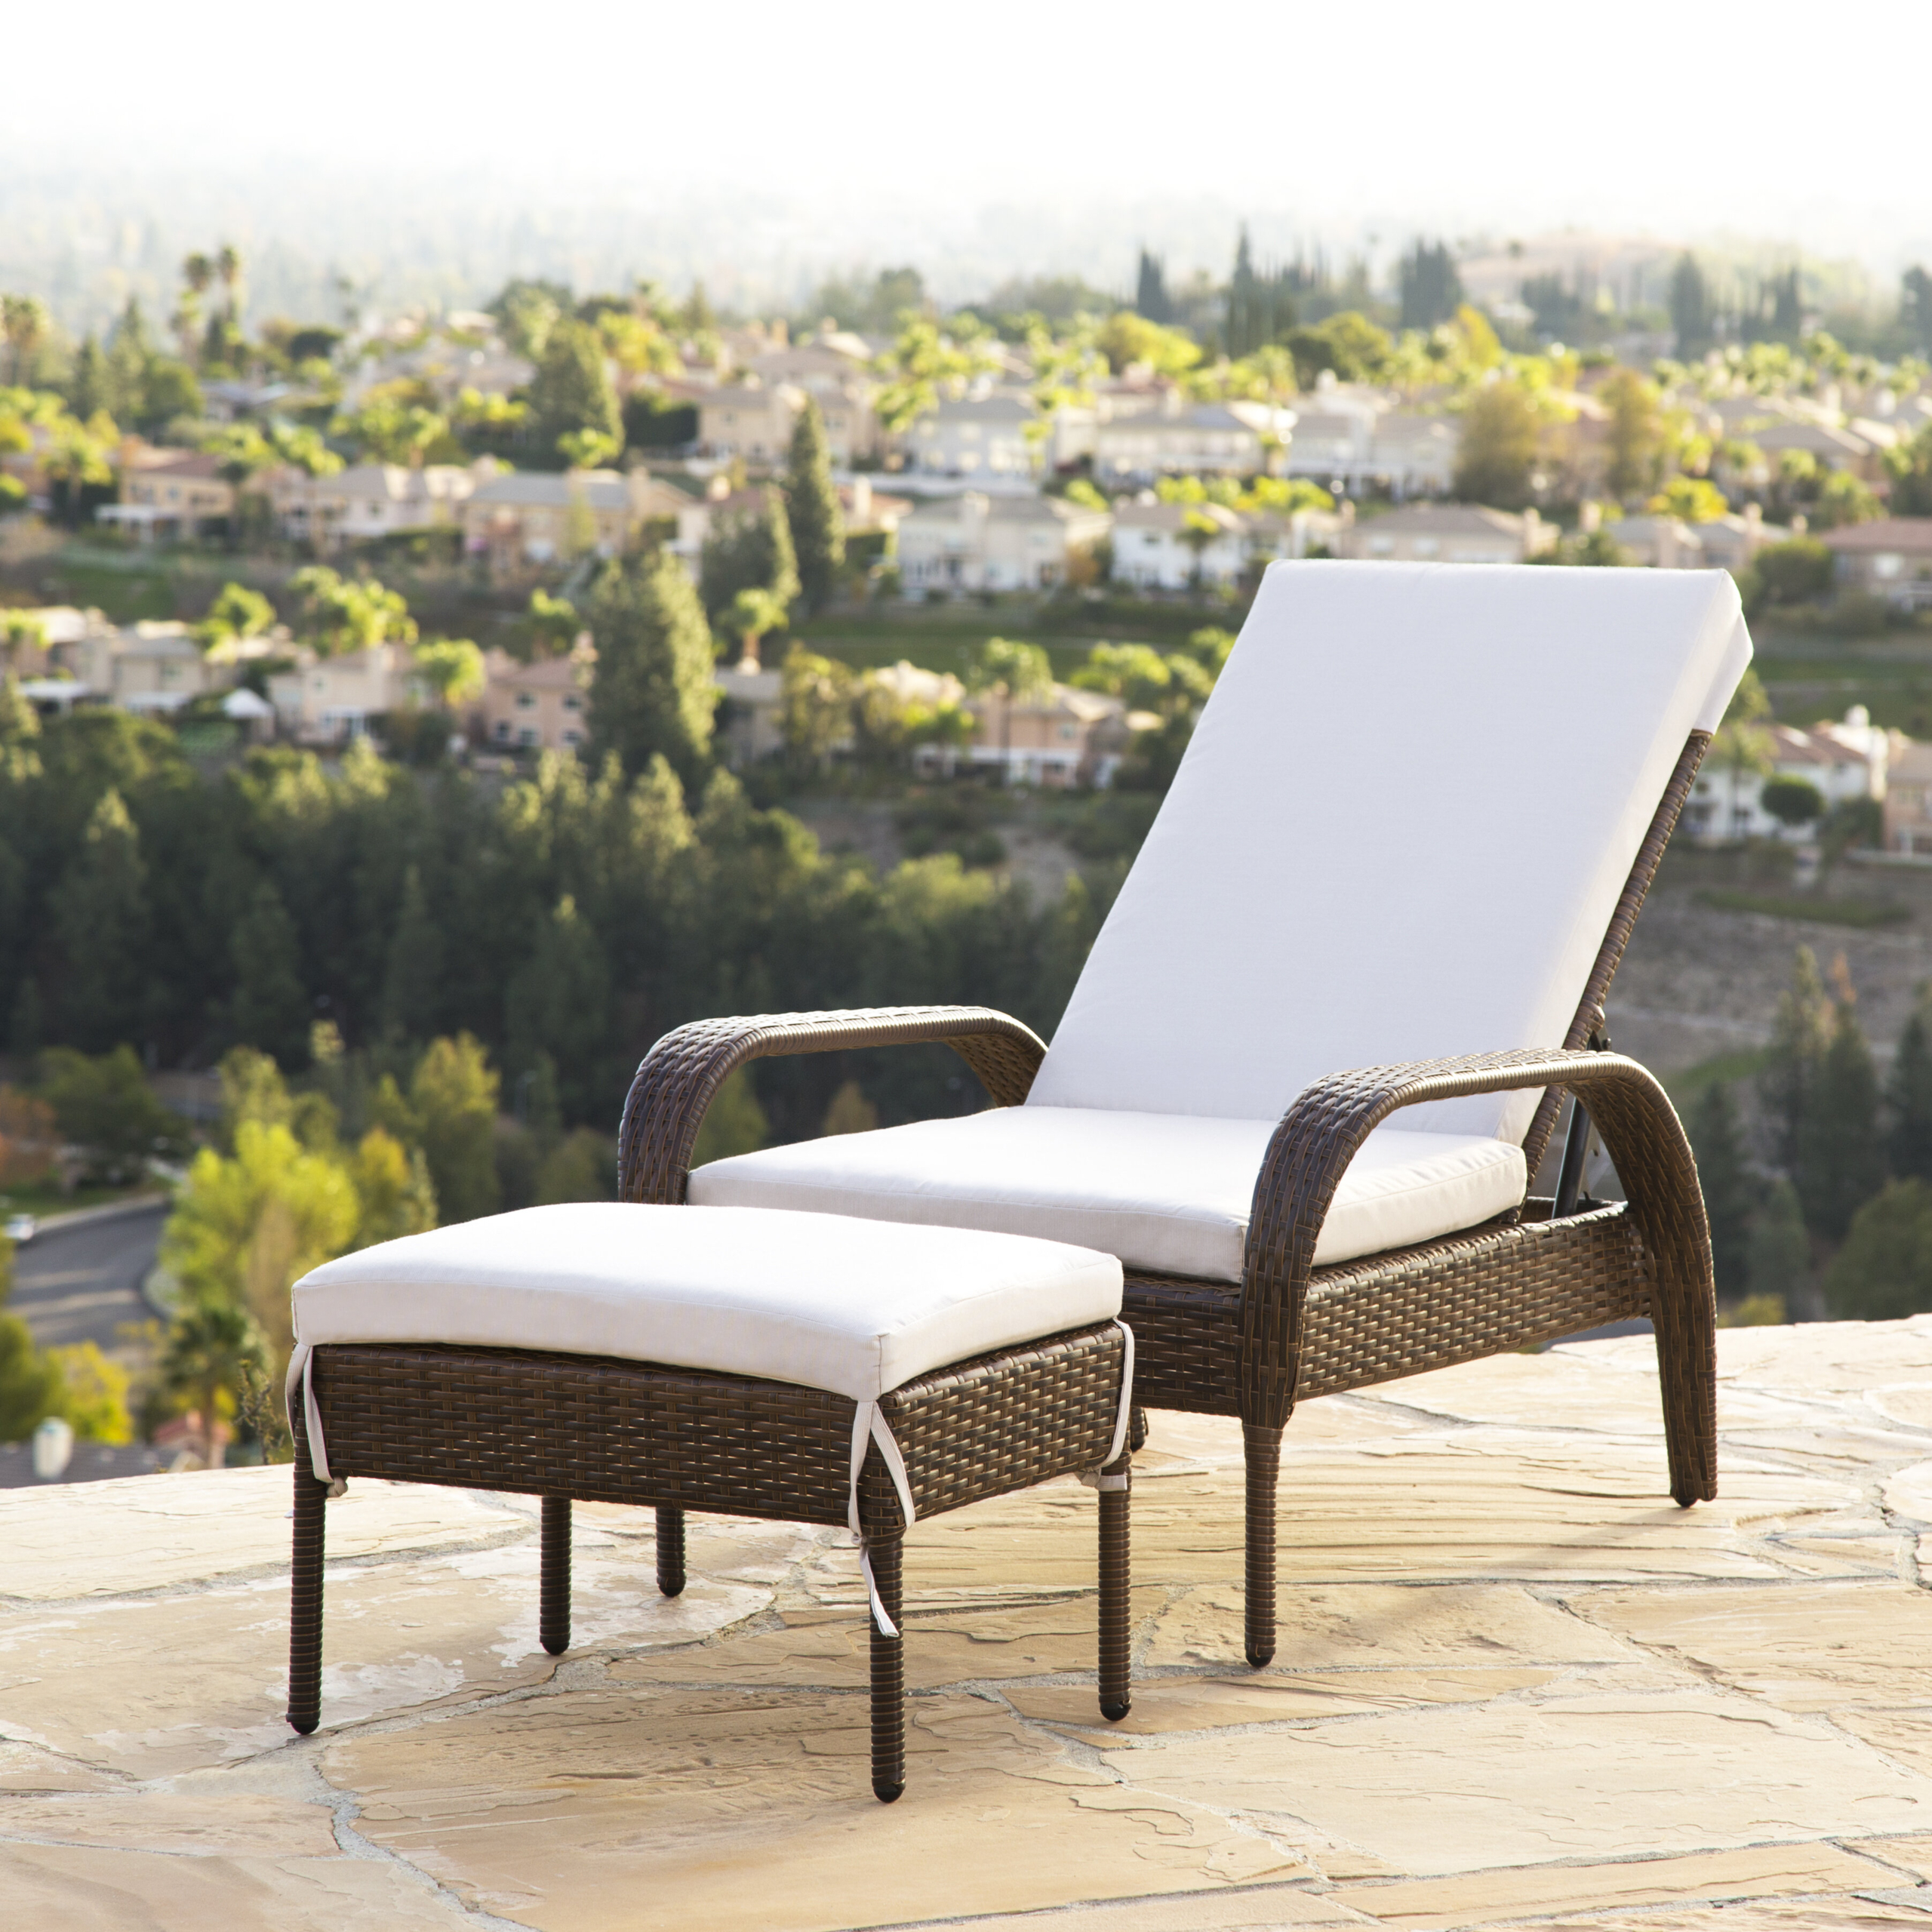 Outdoor Chairs With Ottoman Visualhunt, High Back Patio Chairs With Ottoman